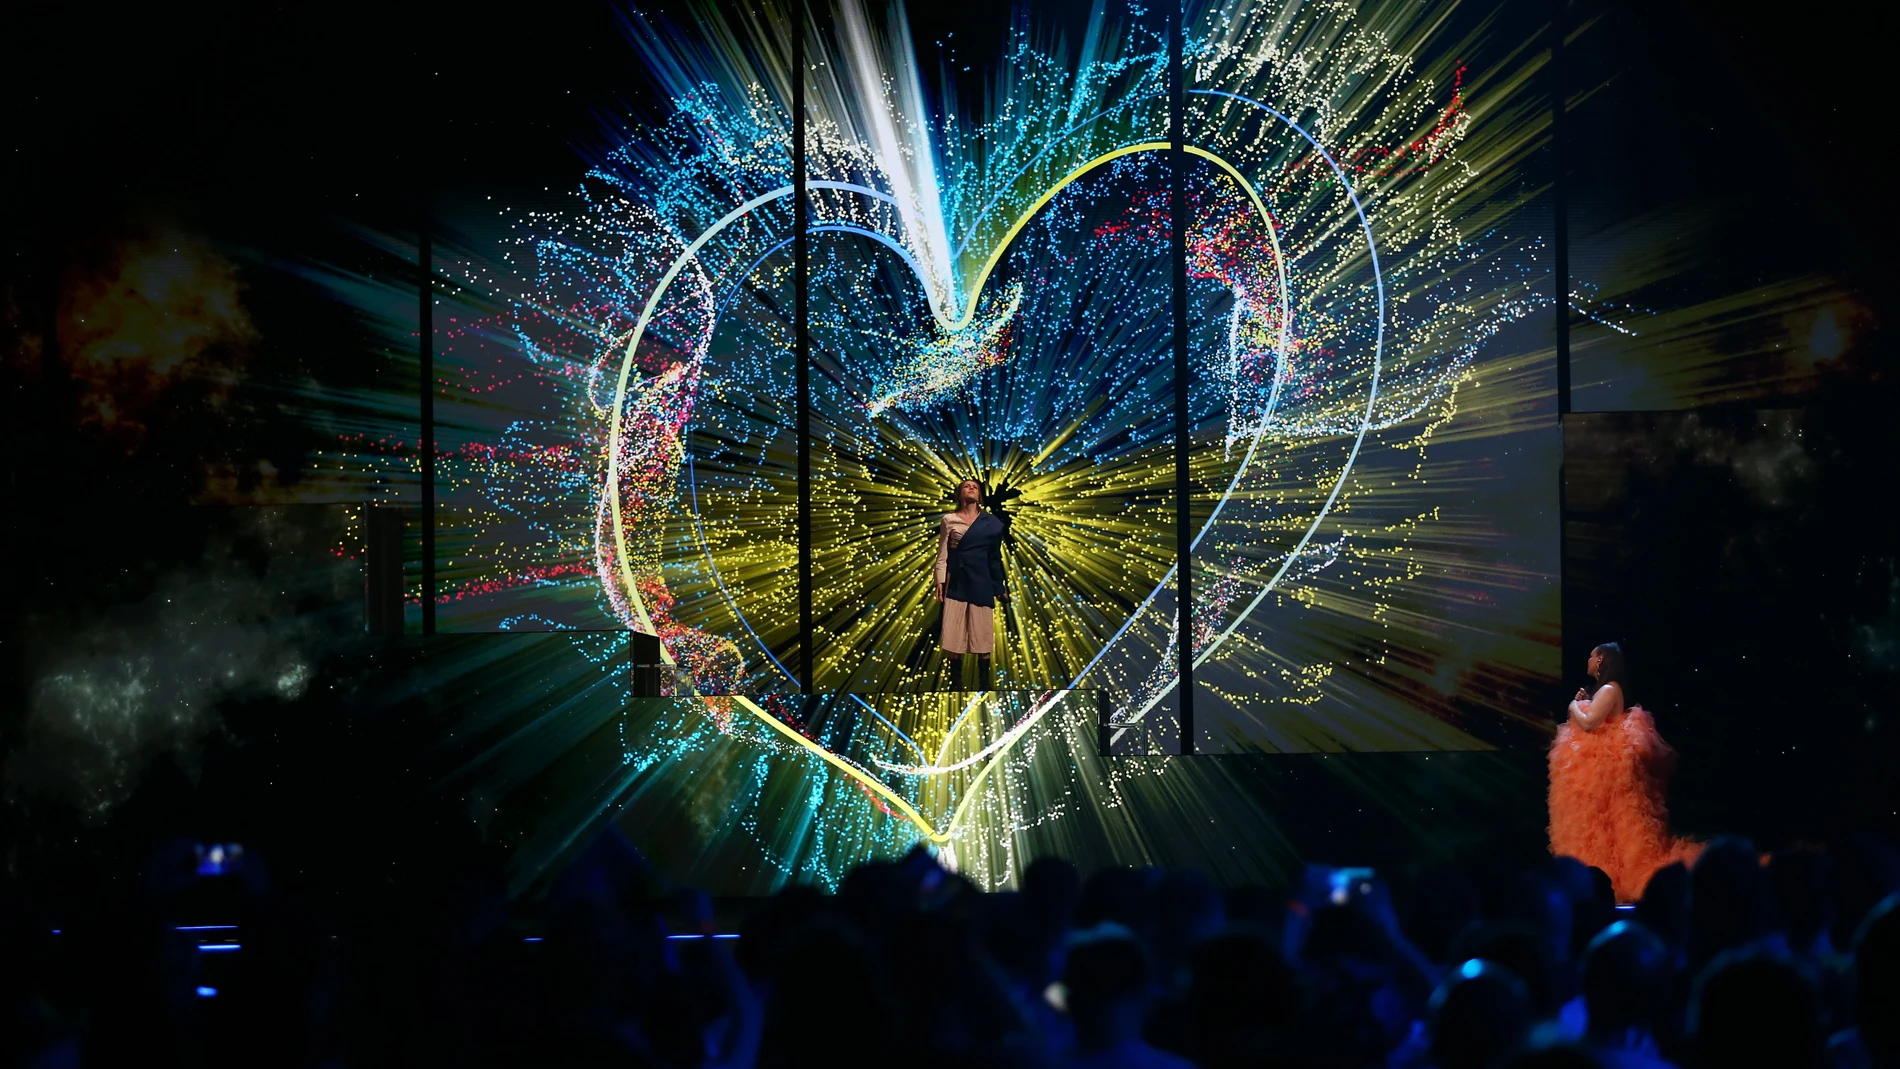 Liverpool (United Kingdom), 09/05/2023.- Ukrainian singer Alyosha (L) with British singer Rebecca Ferguson perform during the voting at the first semi-final of the 67th annual Eurovision Song Contest (ESC) at the M&S Bank Arena in Liverpool, Britain, 09 May 2023. Liverpool is hosting the 2023 Eurovision Song Contest on behalf of Ukraine. The 67th edition ESC consists of two Semi-Finals, held on 09 and 11 May, and a Grand Final on 13 May 2023. (Ucrania, Reino Unido) EFE/EPA/Adam Vaughan 